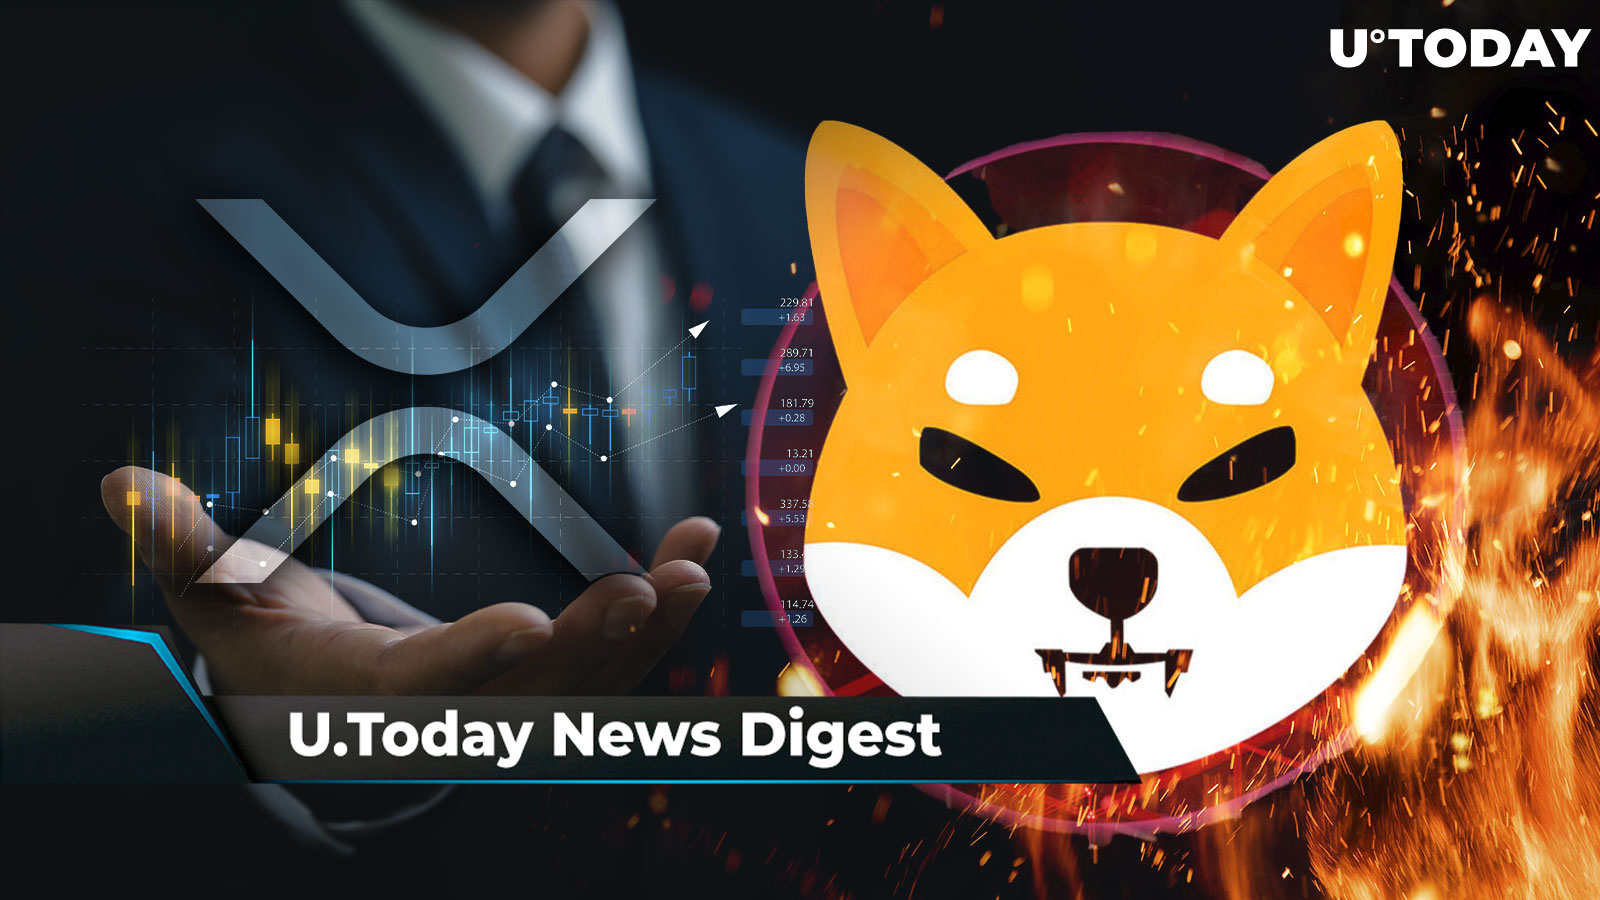 Shiba Inu Coming to Canada With Major Partnership, XRP Tops $0.8 After Price Spike, Dormant SHIB Wallet Awakens to Help Burn 113 Million SHIB: Crypto News Digest by U.Today